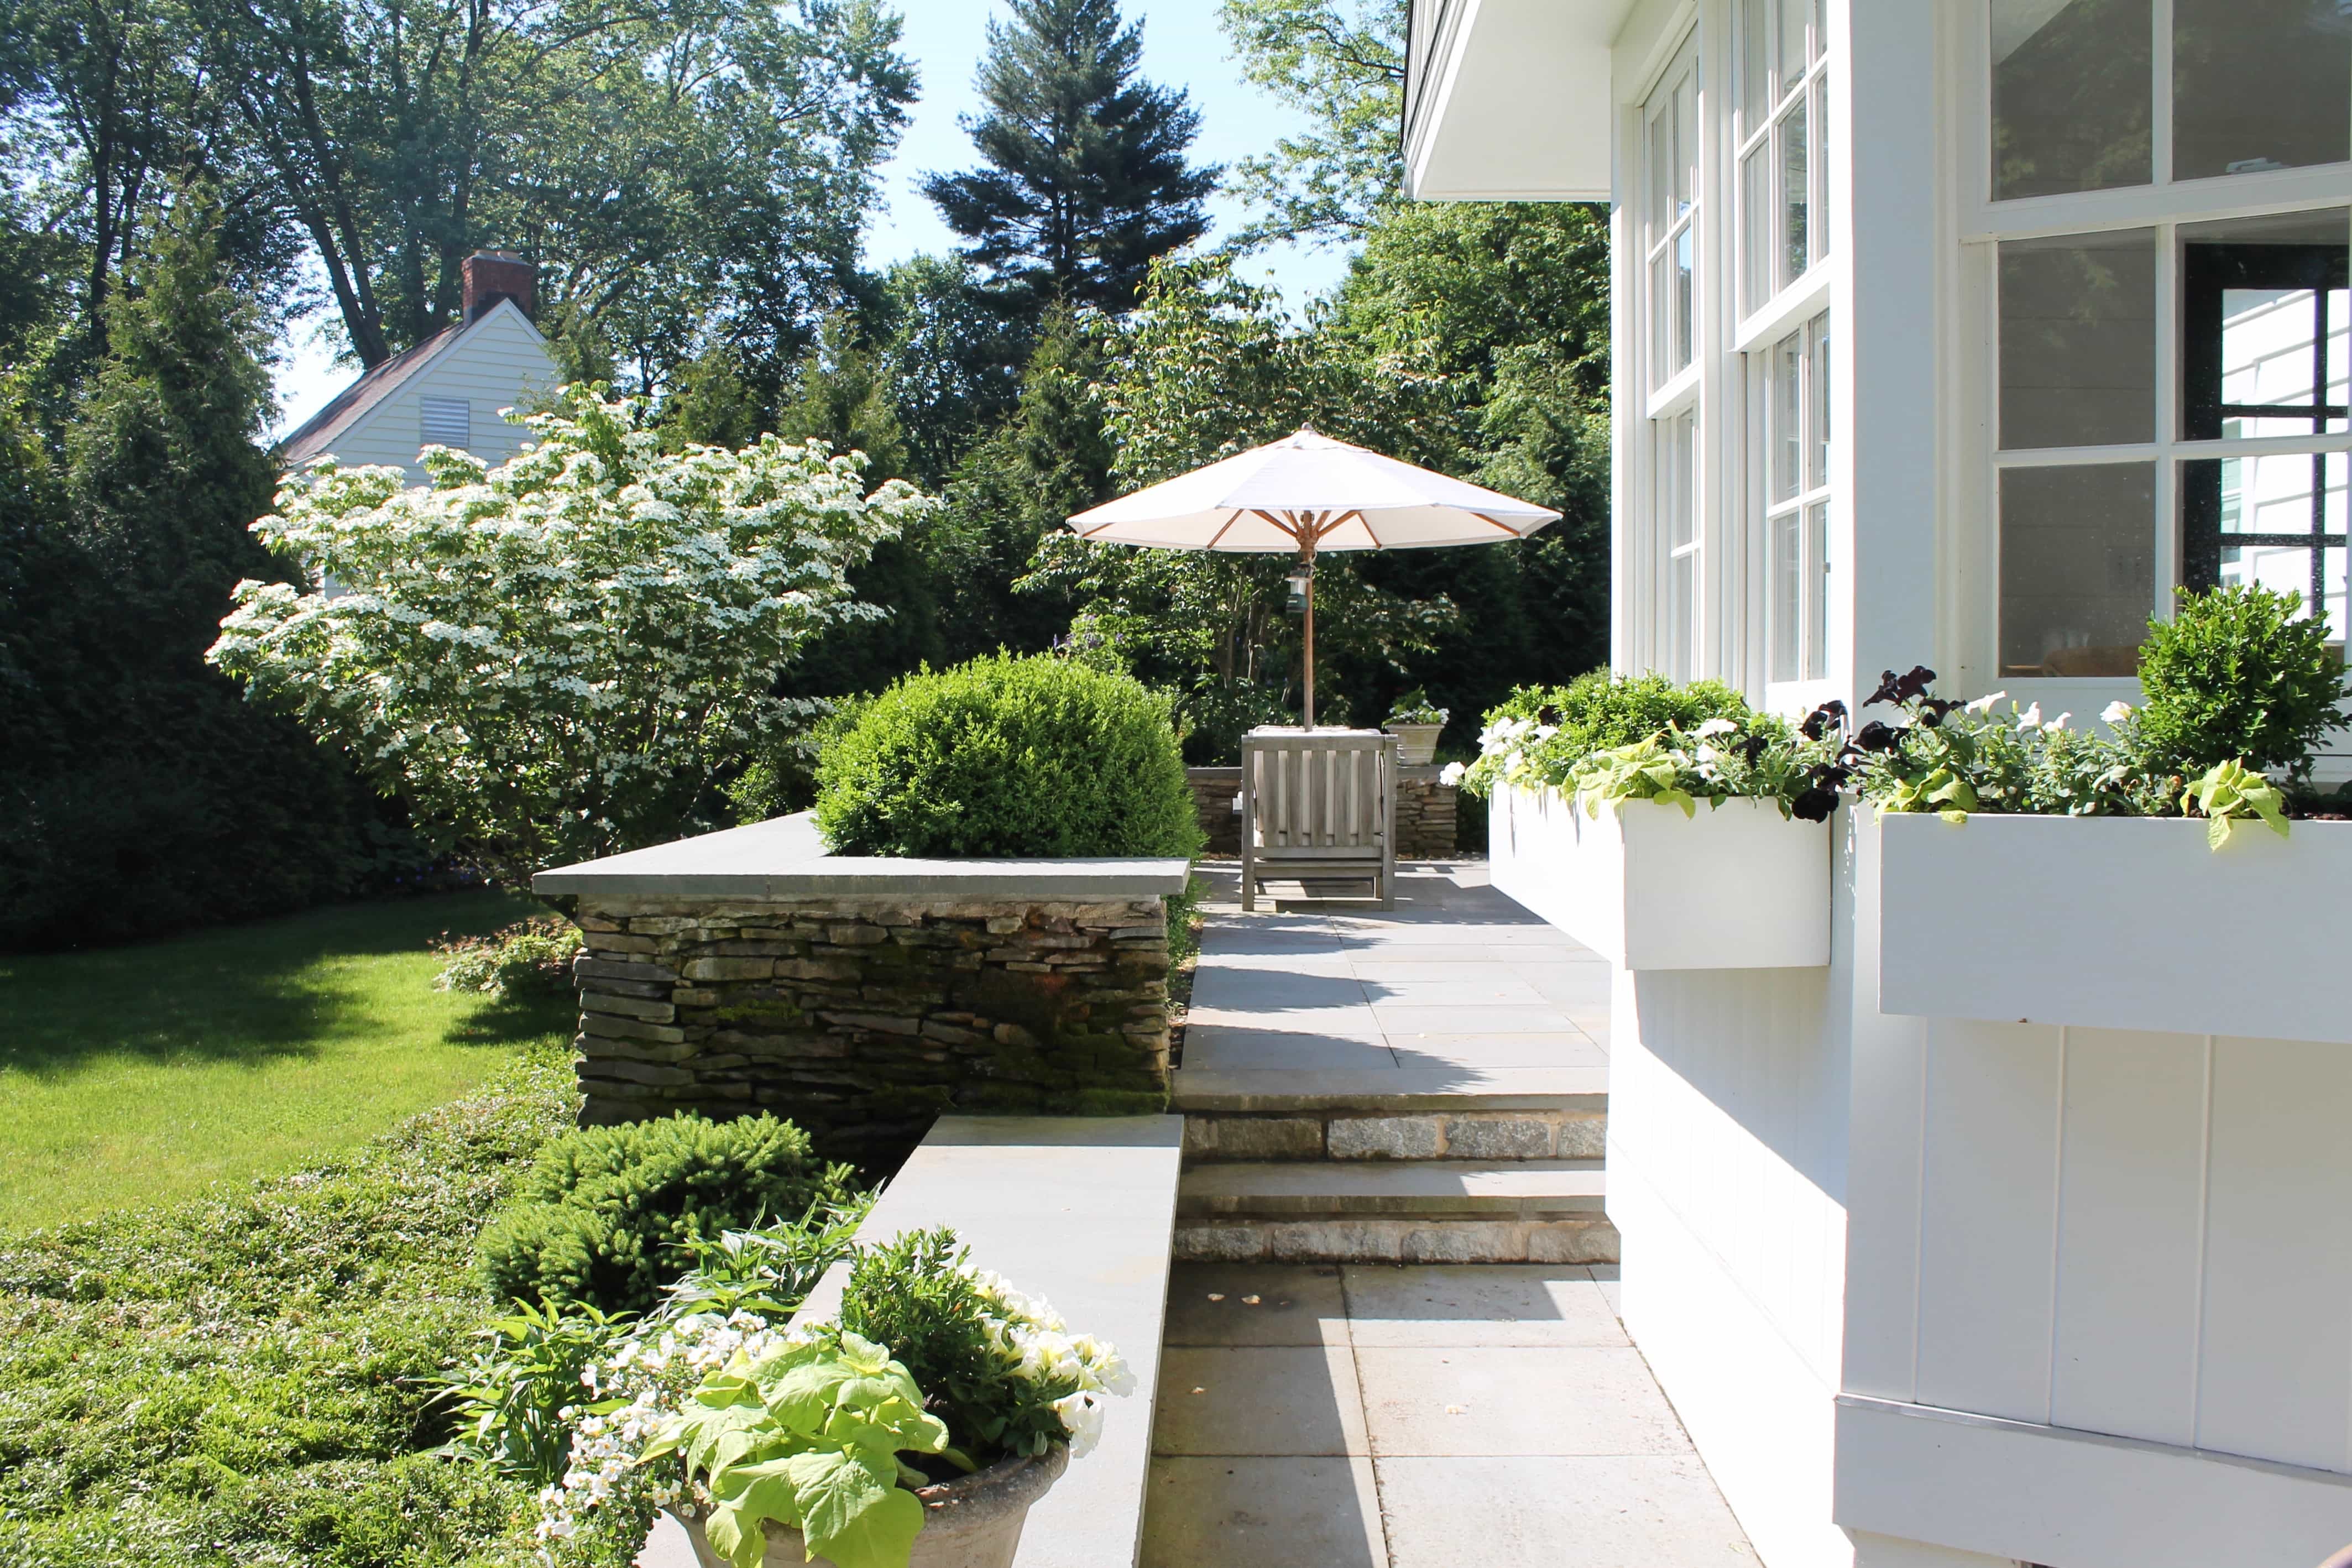 A Connecticut Cottage in Summer